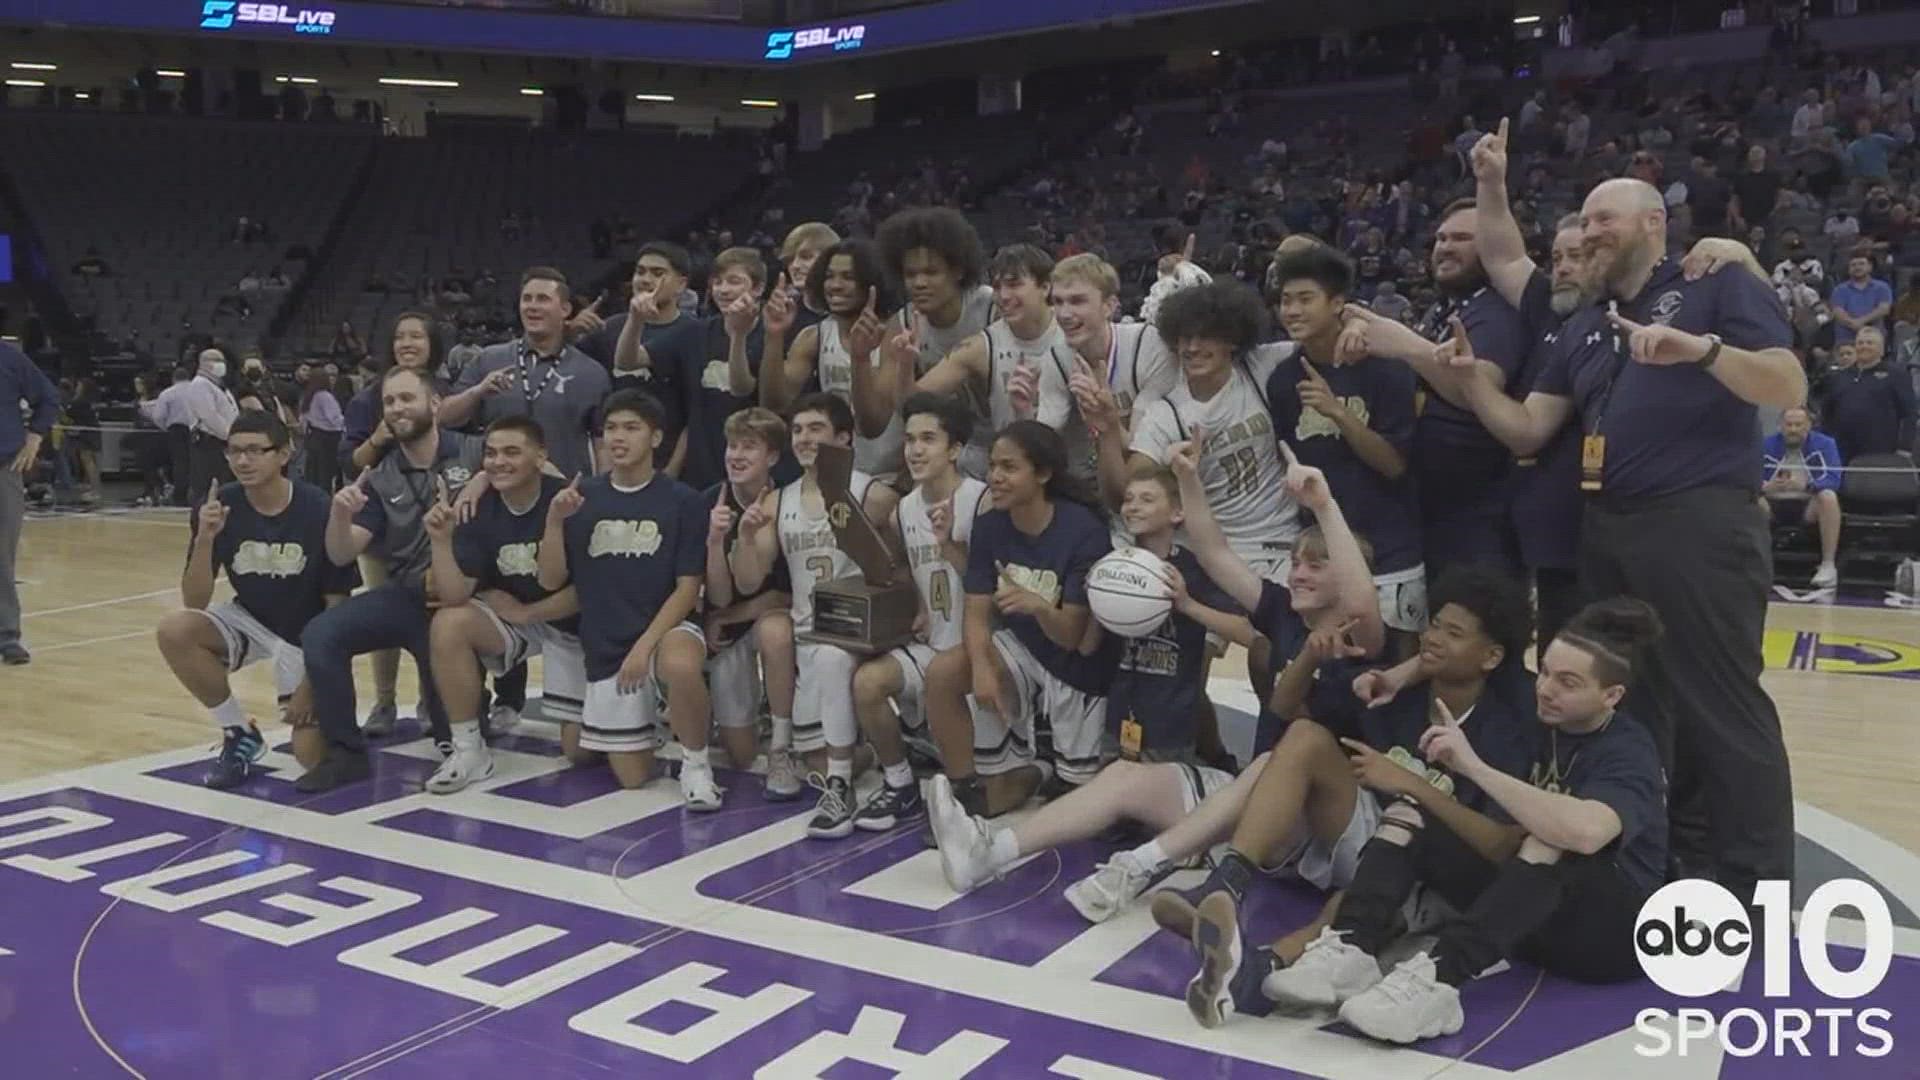 The Elk Grove Thundering Herd won the first CIF Boys Basketball Div. II State title in school history by beating Foothill of Santa Ana 62-56 at Golden 1 Center.